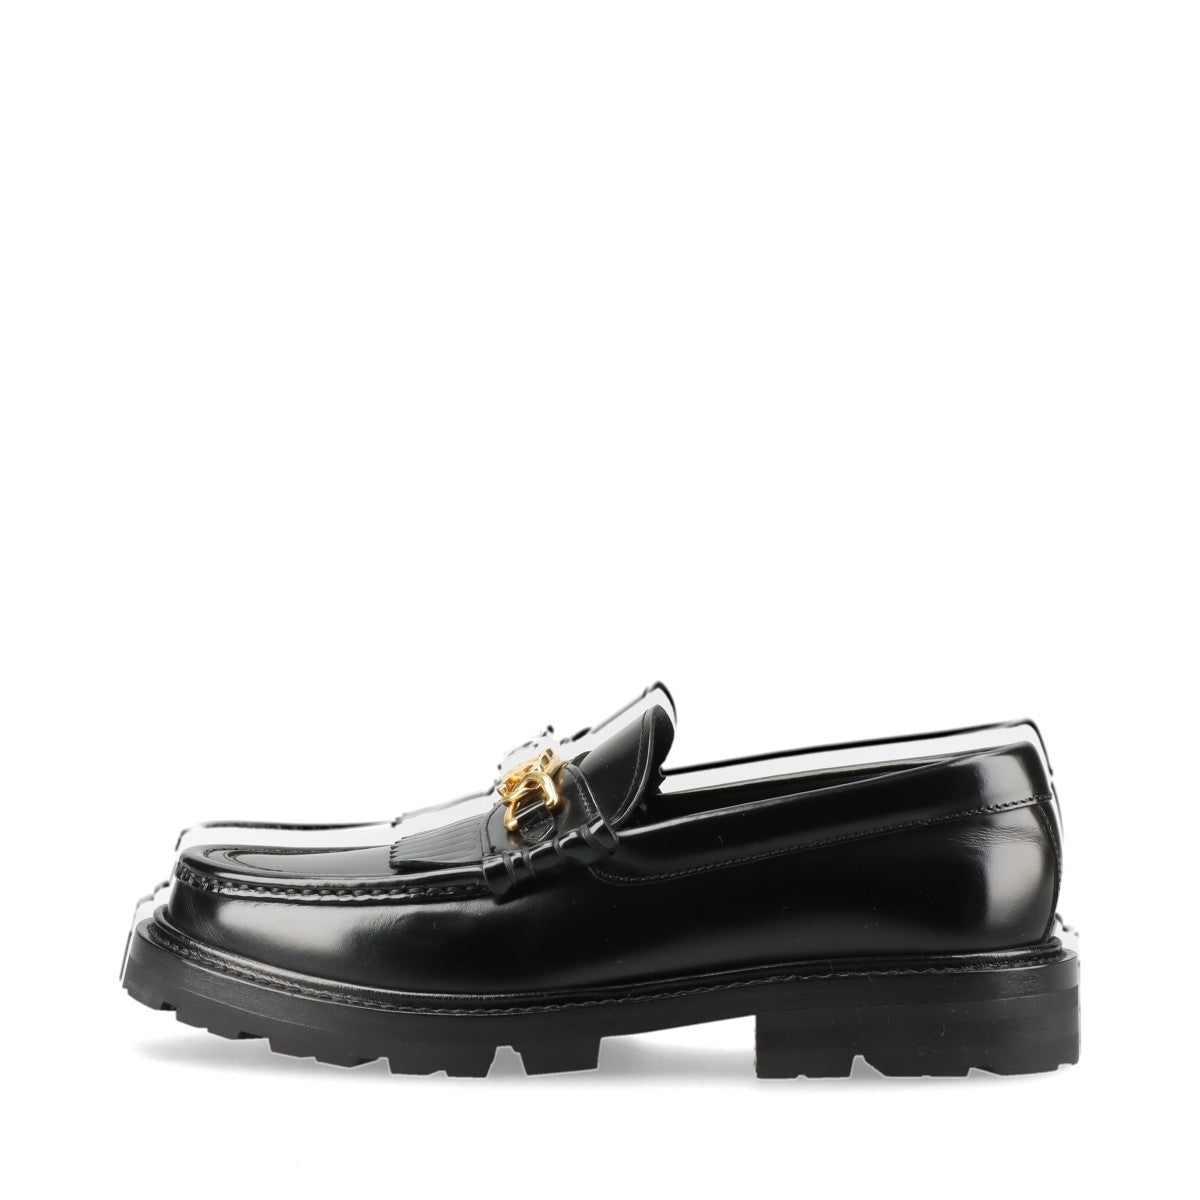 Celine Margaret Hedi Period Leather Loafer 36 Ladies' Black MG1211 Triomphe chain Fringe Box Included